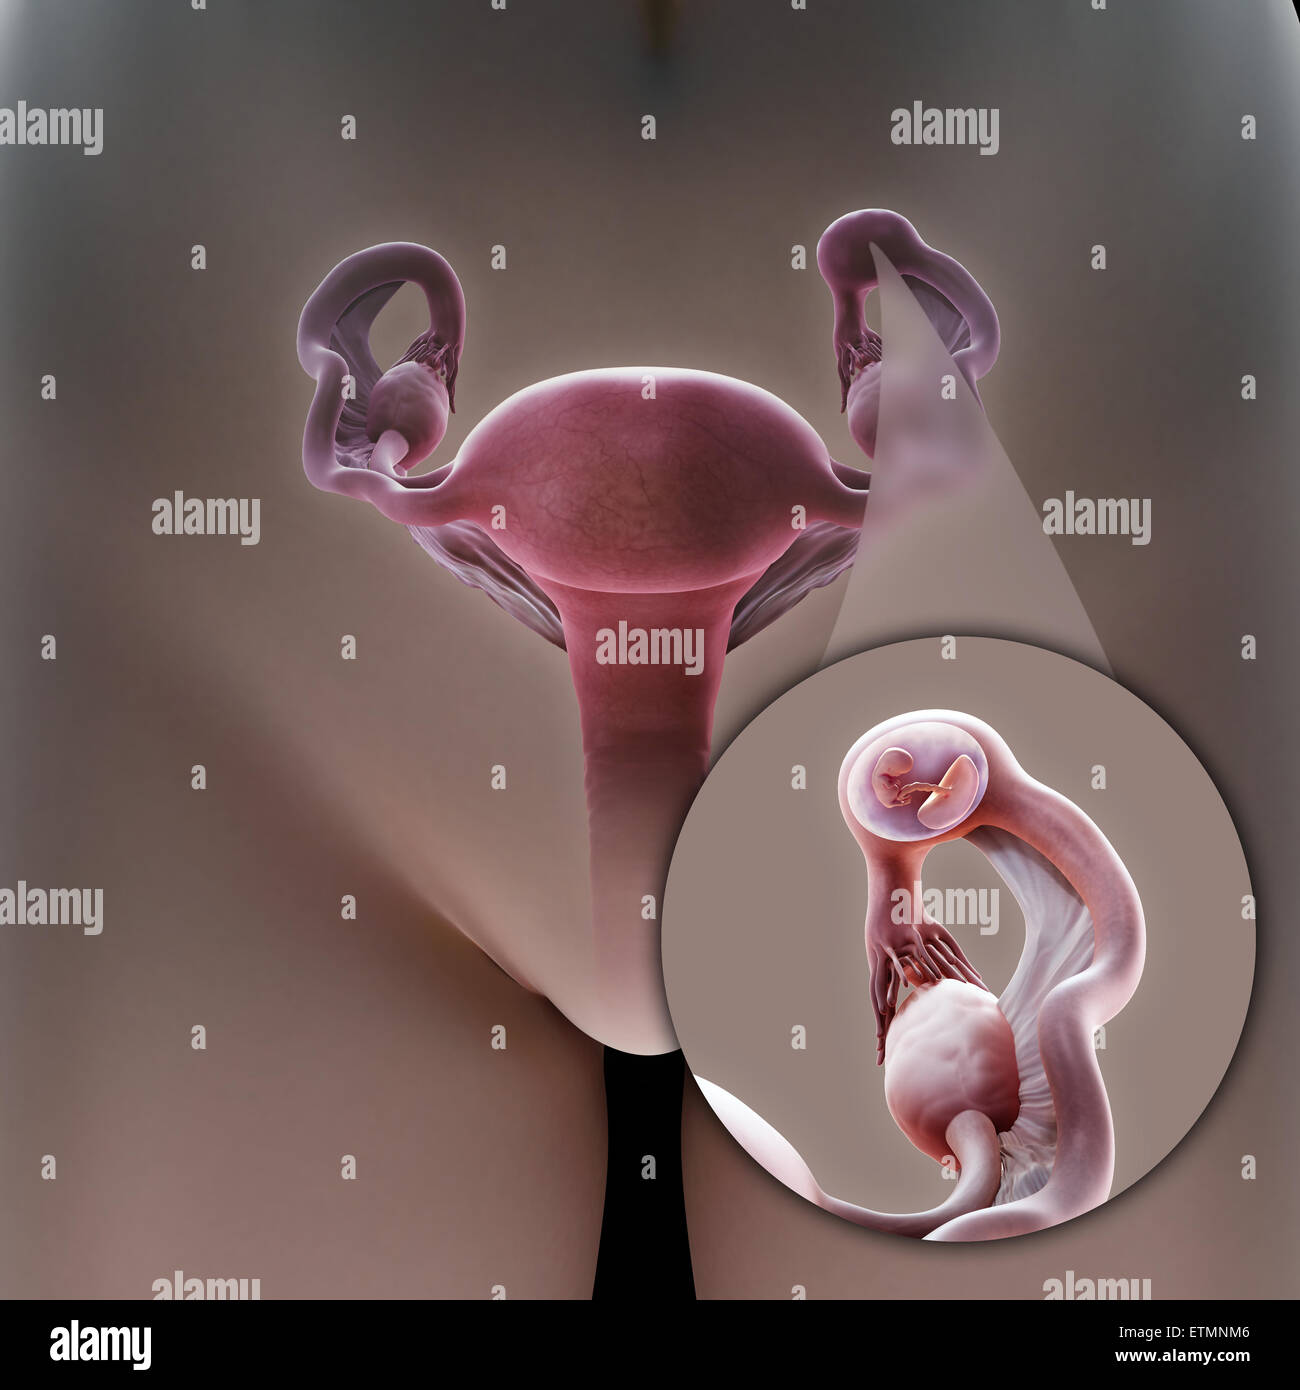 Illustration of the female reproduction system during an ectopic pregnancy location in the ampulla section of the Fallopian tube, a zoomed out section shows the embryo. Stock Photo